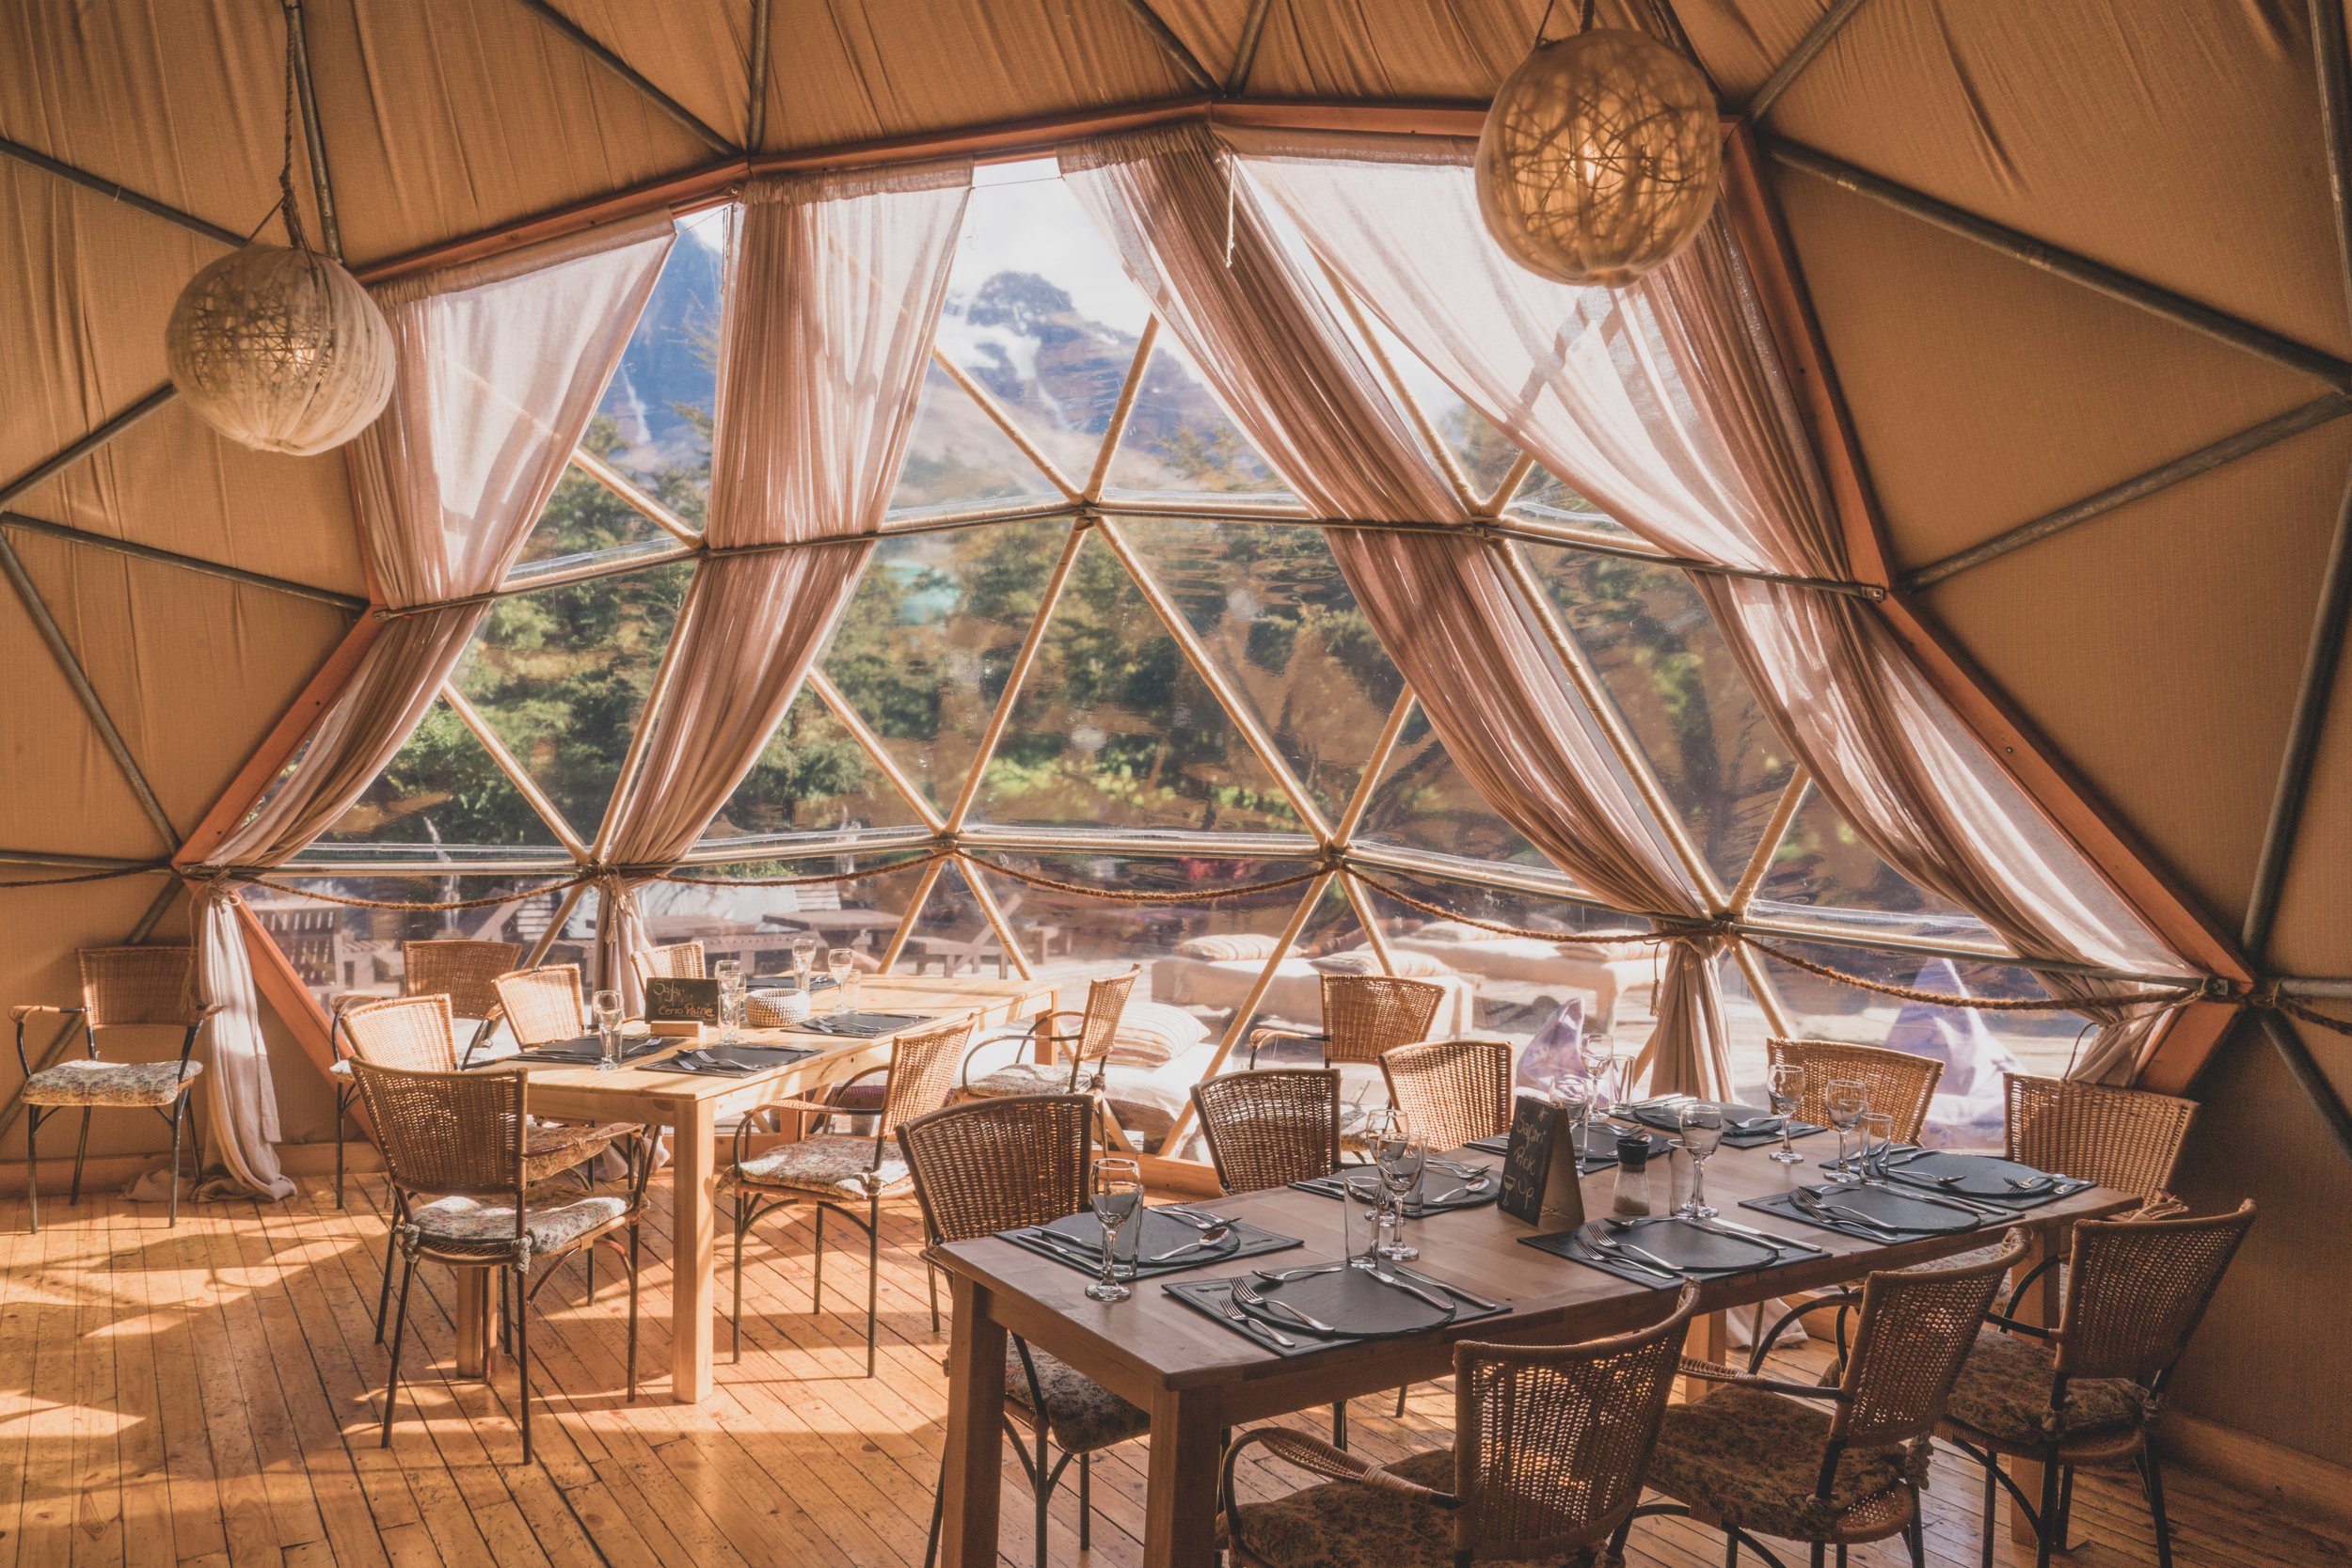 community-domes--restaurant-at-ecocamp-patagonia-torres-del-paine-chile_48192301207_o.jpg